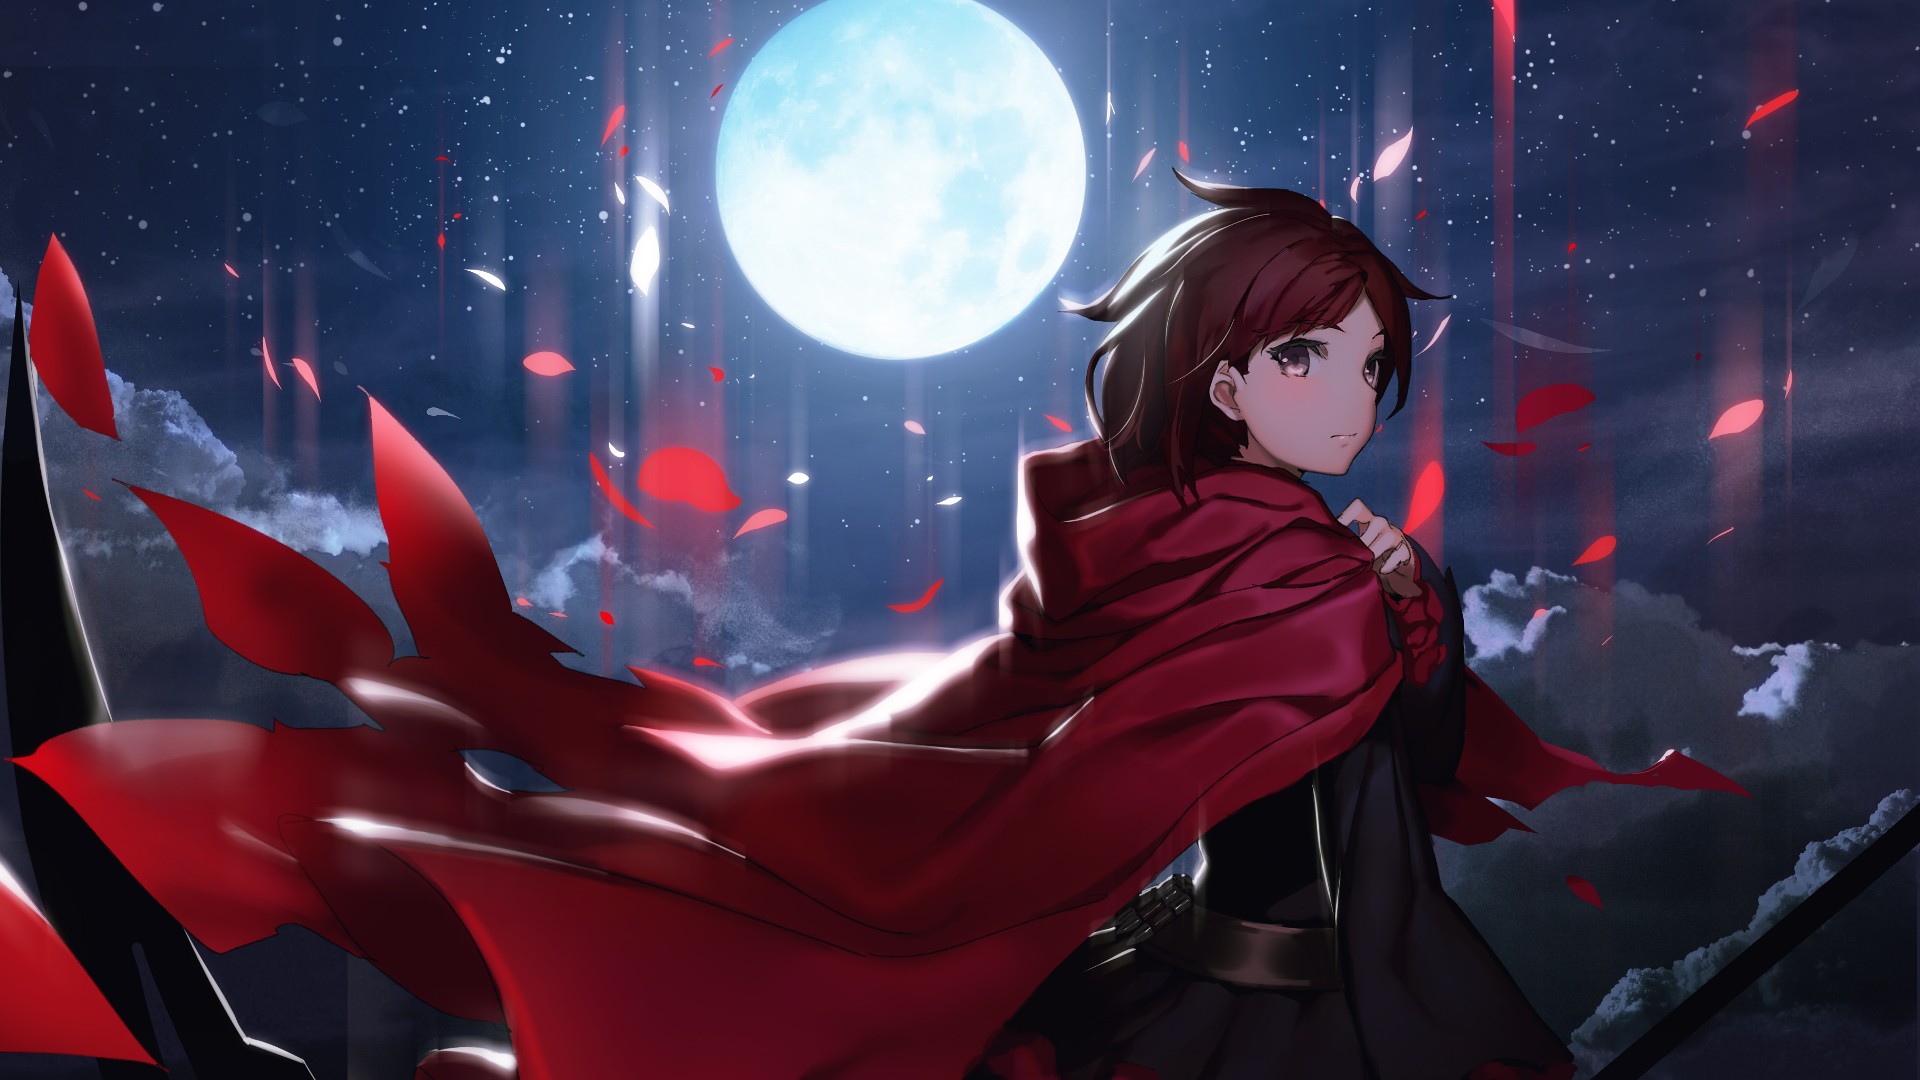 Moon Anime Girls Rwby Hd Wallpapers Desktop And Mobile Images Photos